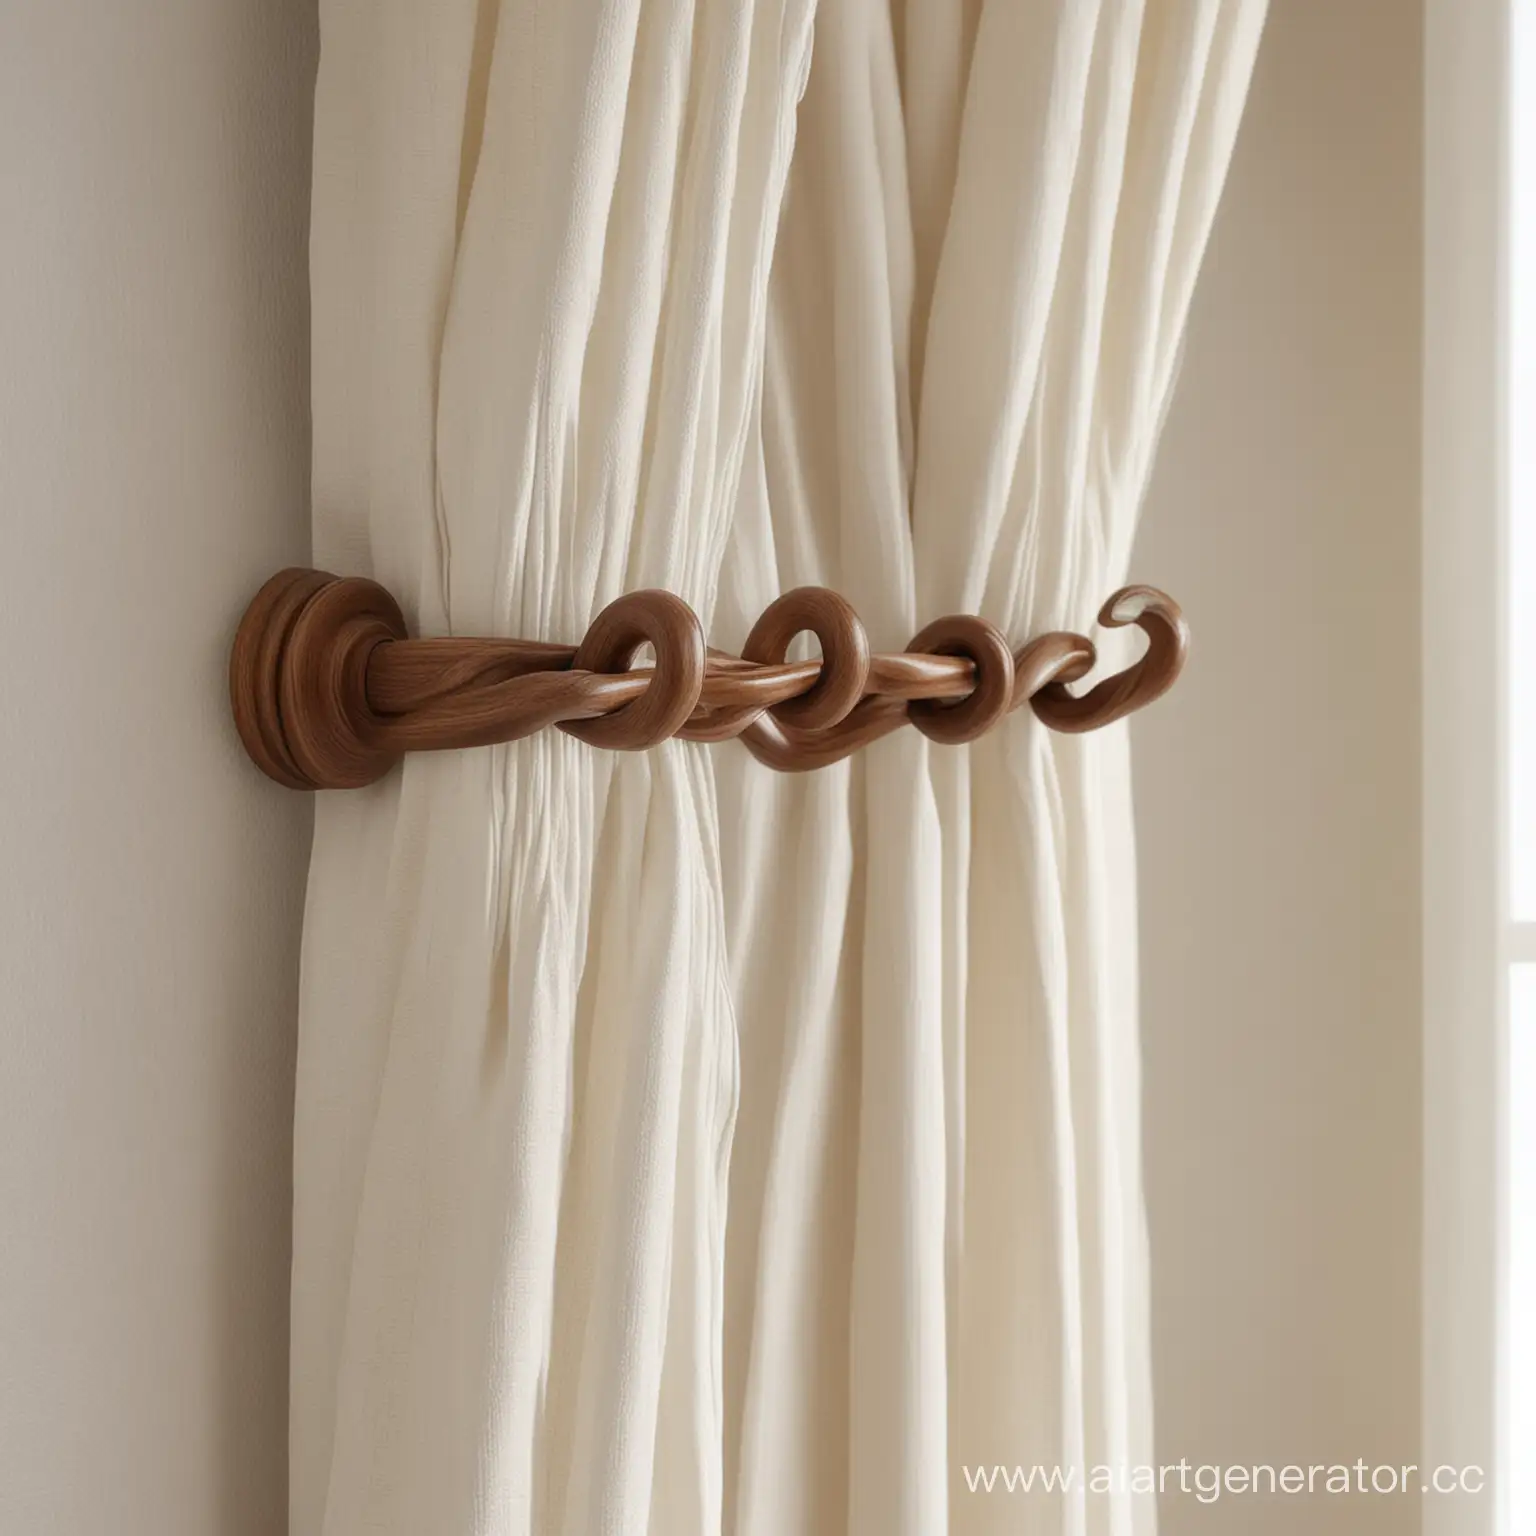 Curtain-Hooks-on-a-Curtain-Rod-in-a-Home-Interior-Setting